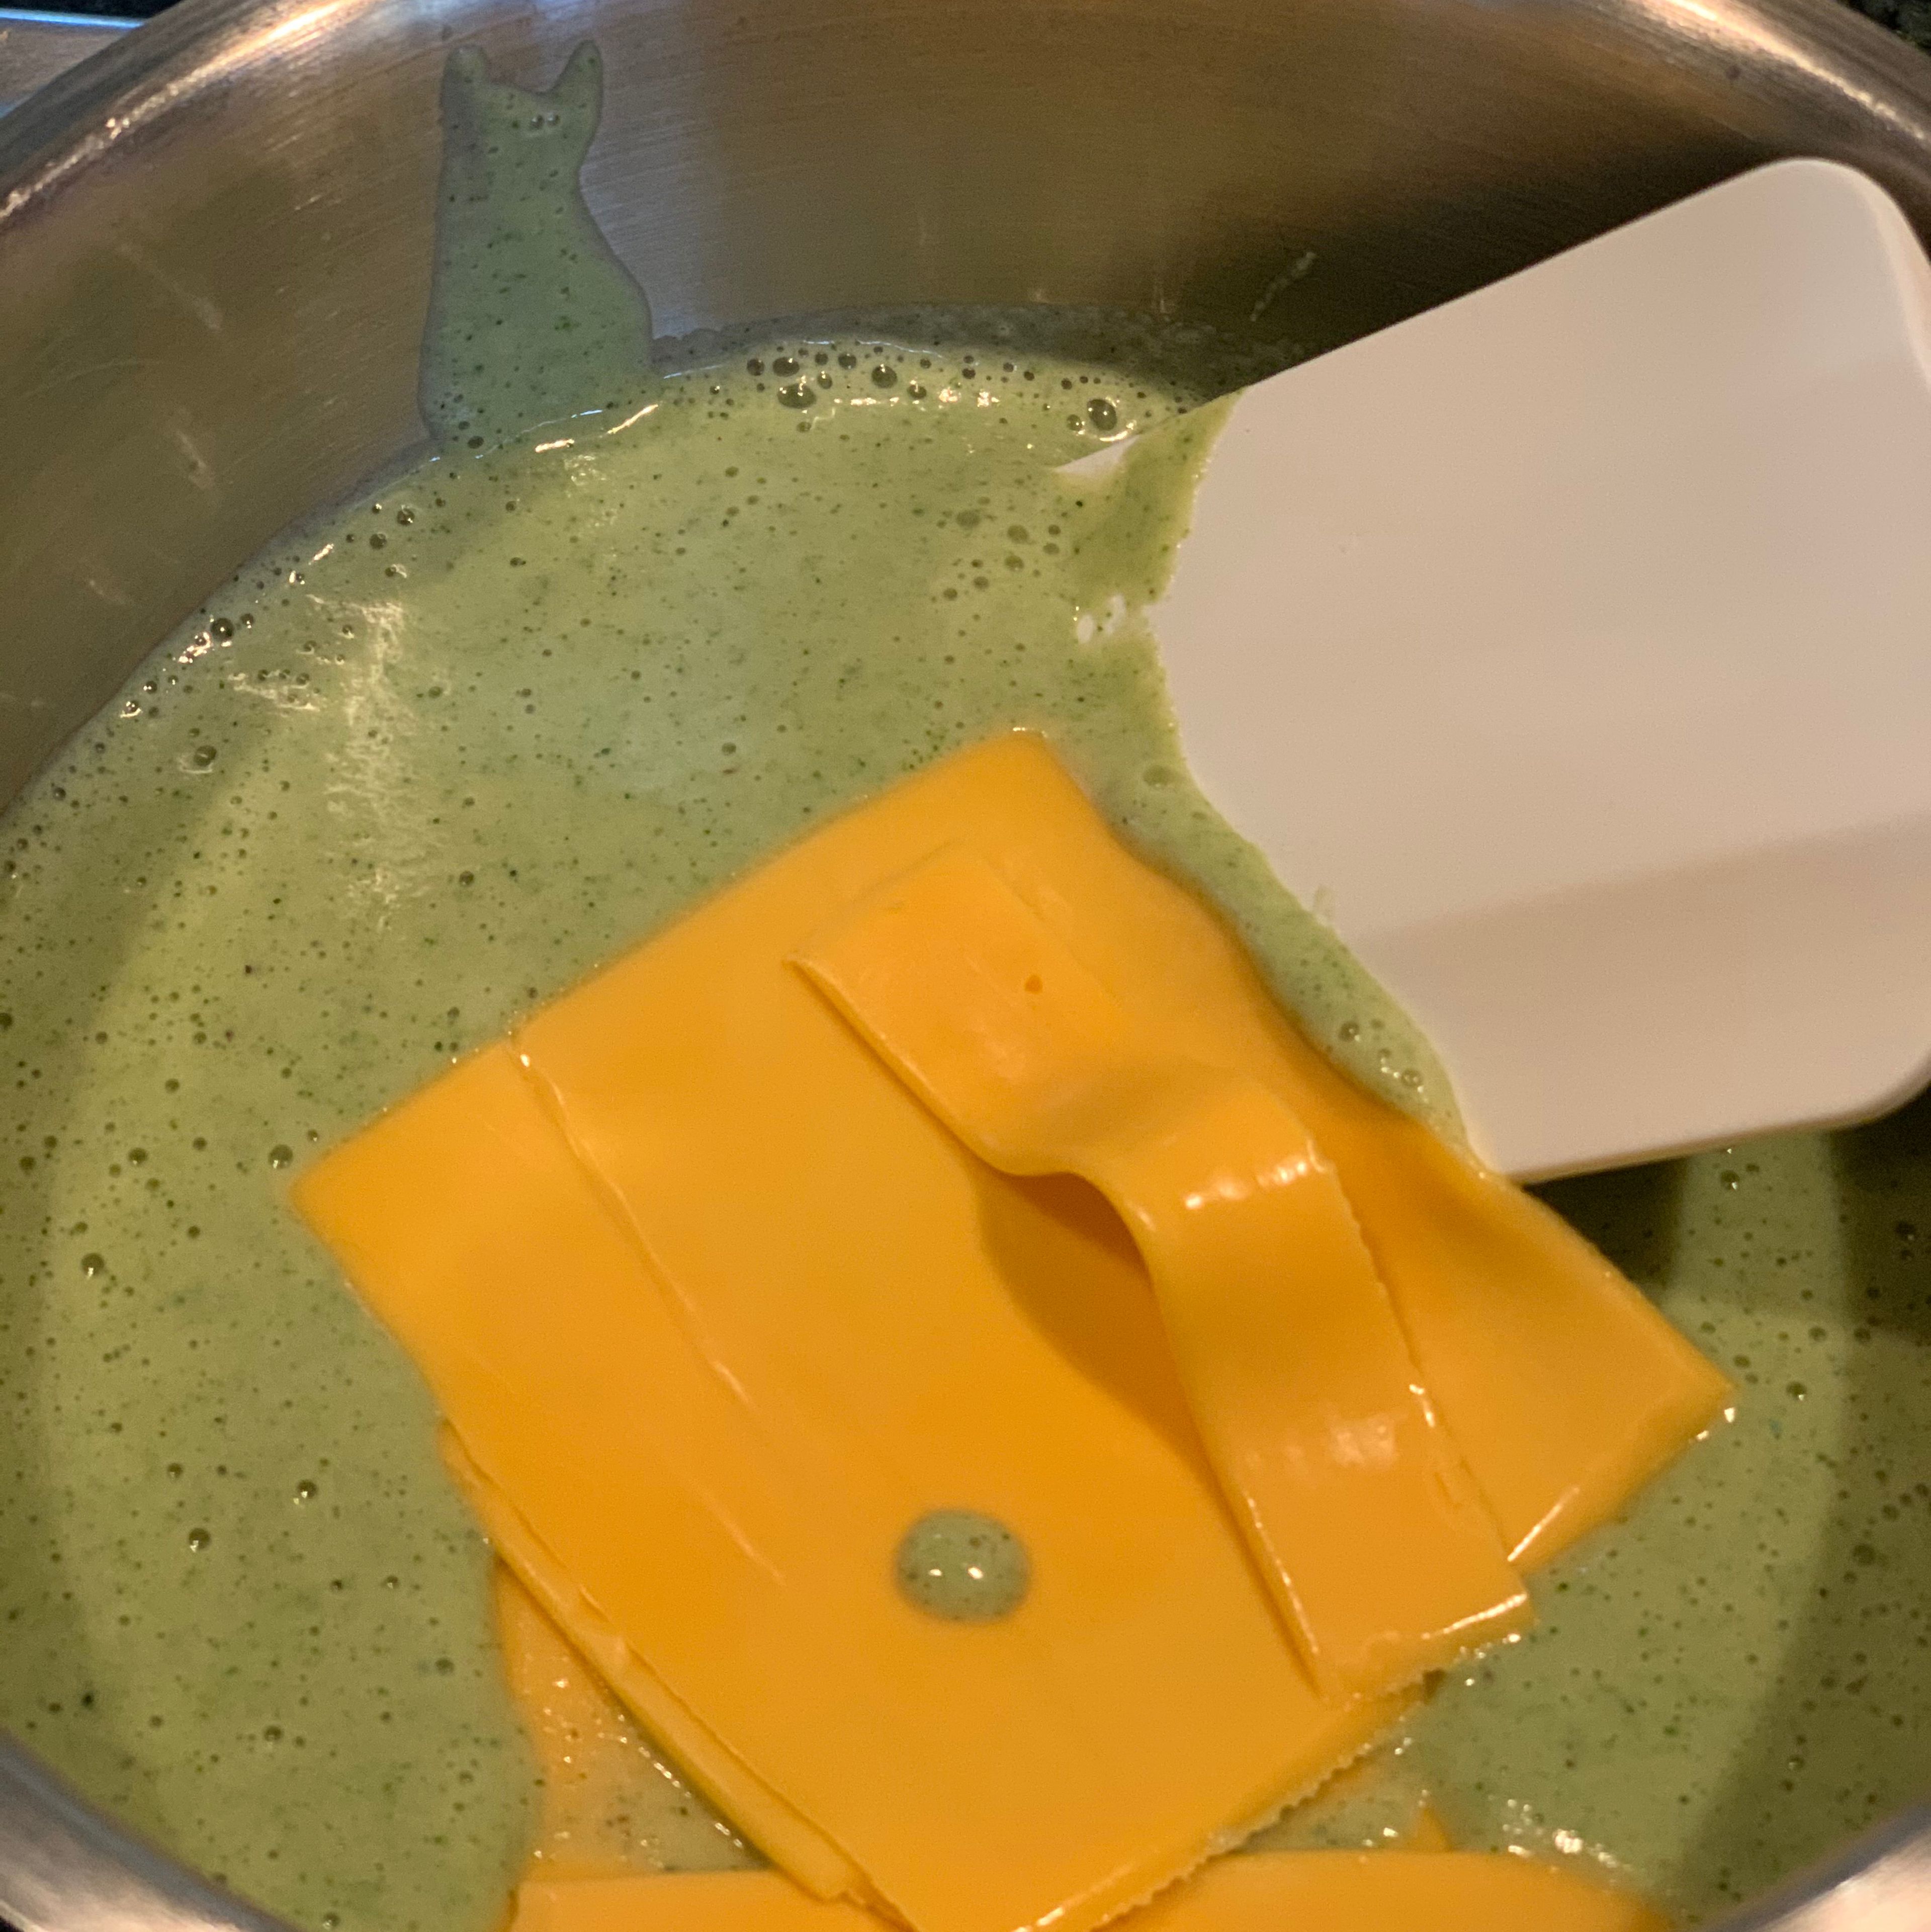 Add the American cheese and mix until fully combined.